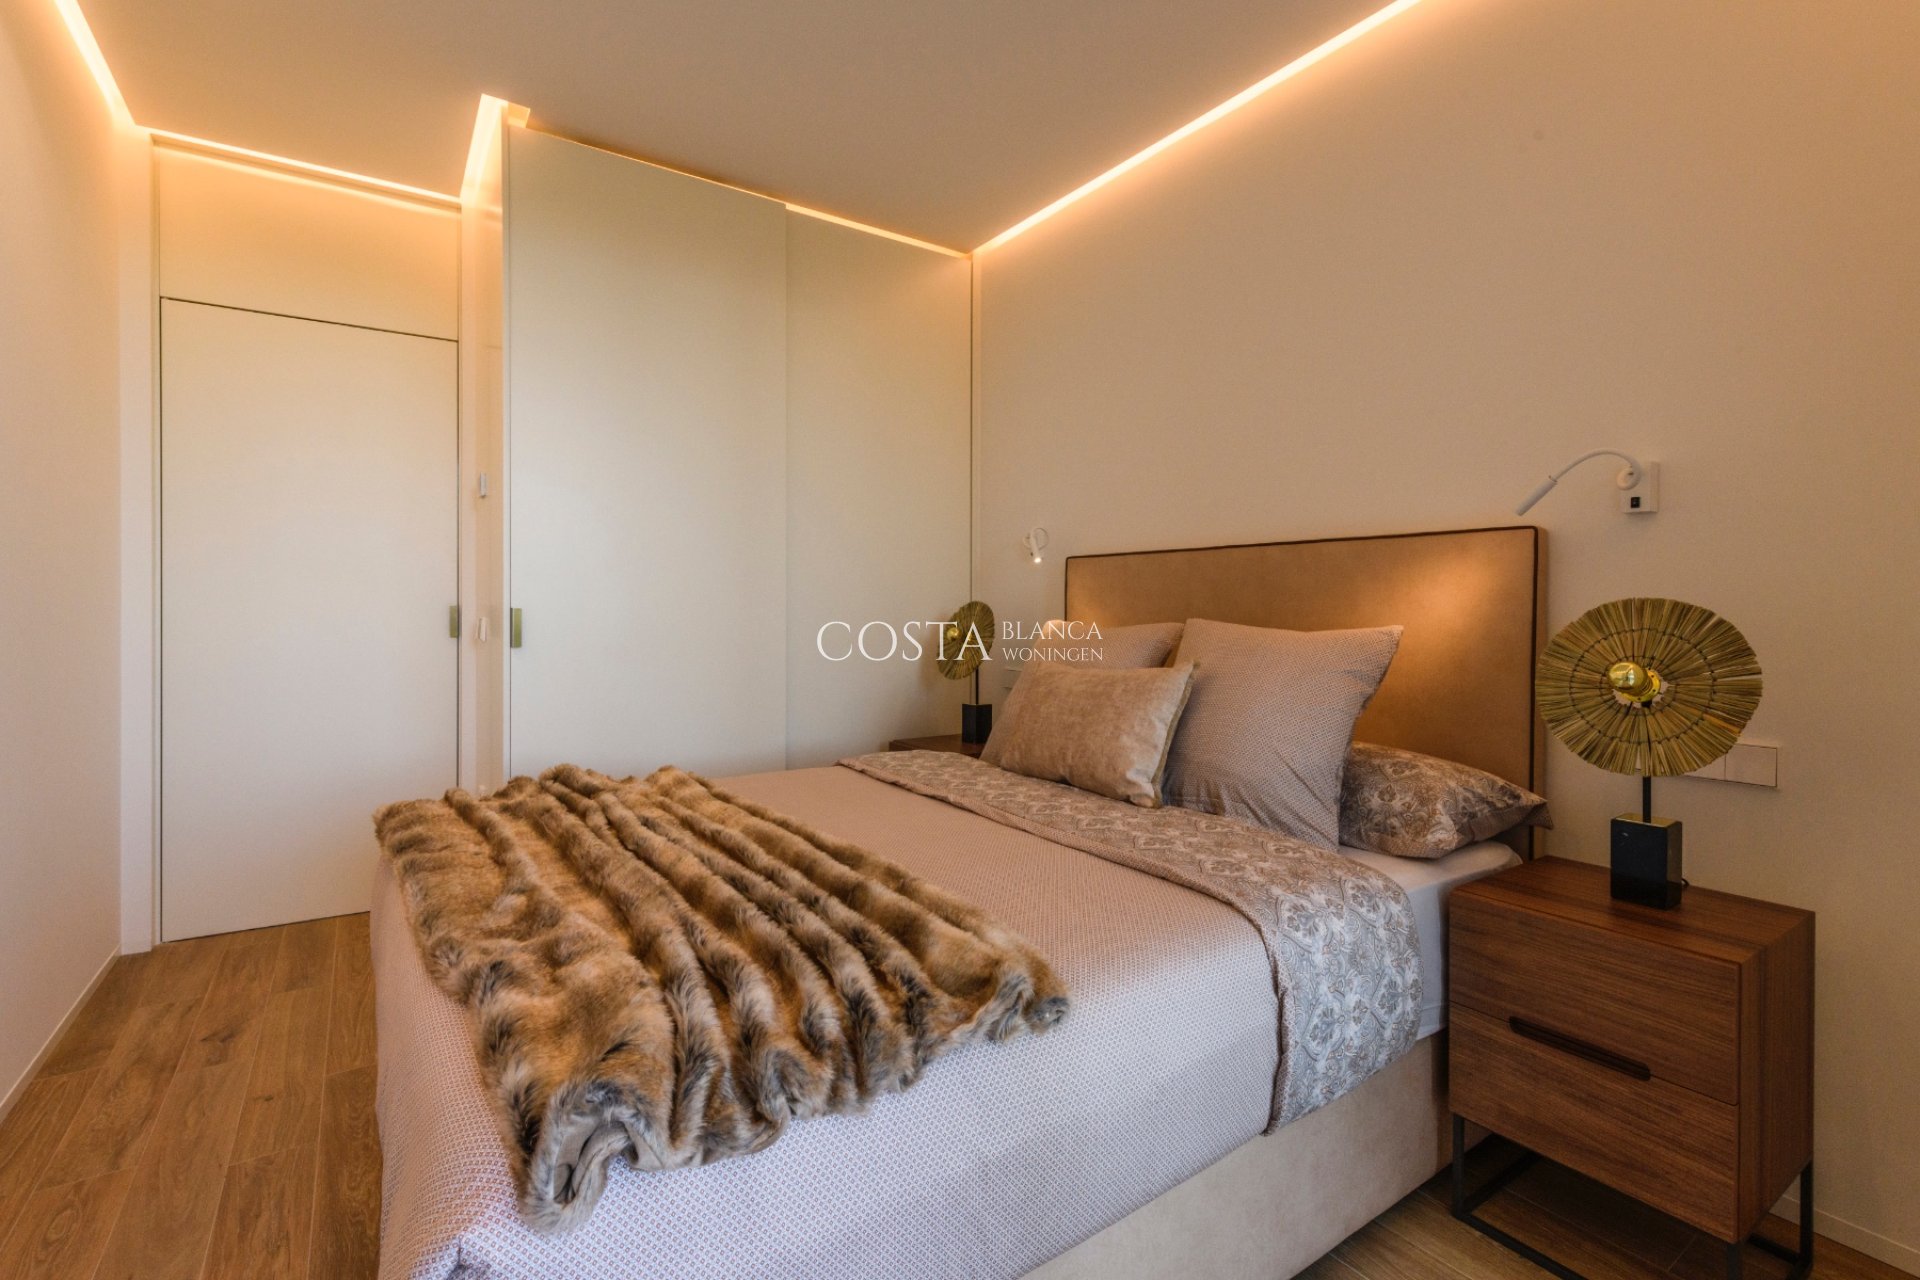 Nouvelle construction - Appartement -
Las Colinas Golf and Country Club